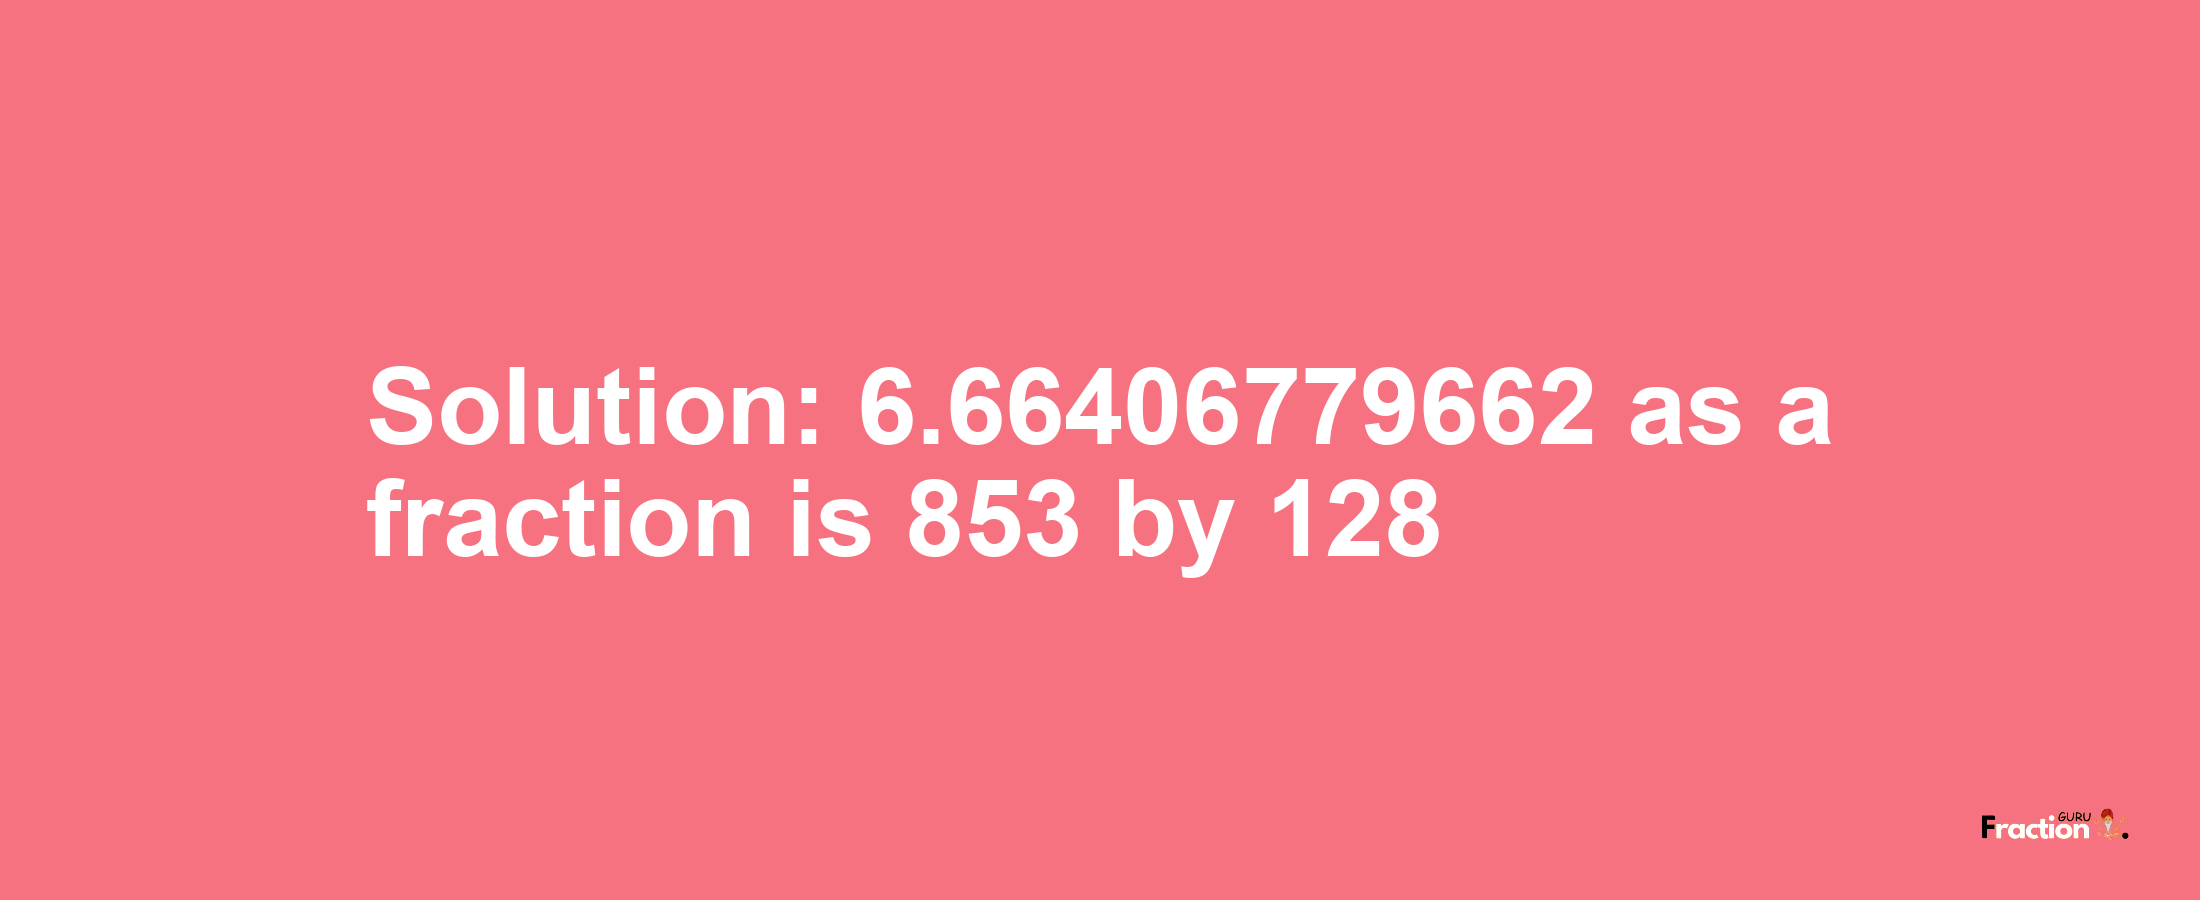 Solution:6.66406779662 as a fraction is 853/128